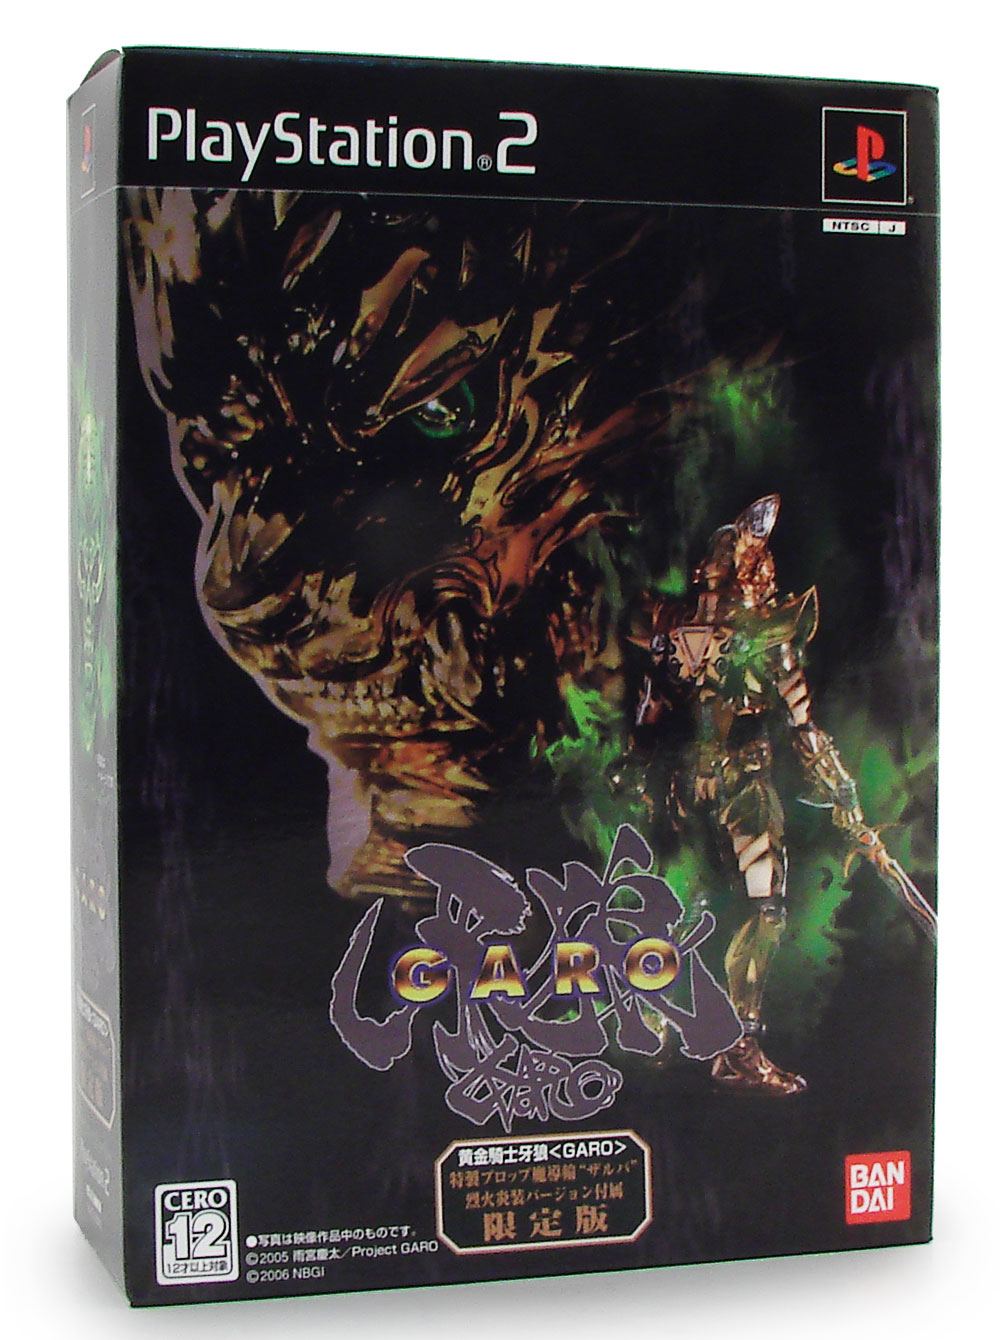 Golden Knight Garo [Limited Edition] for PlayStation 2 - Bitcoin